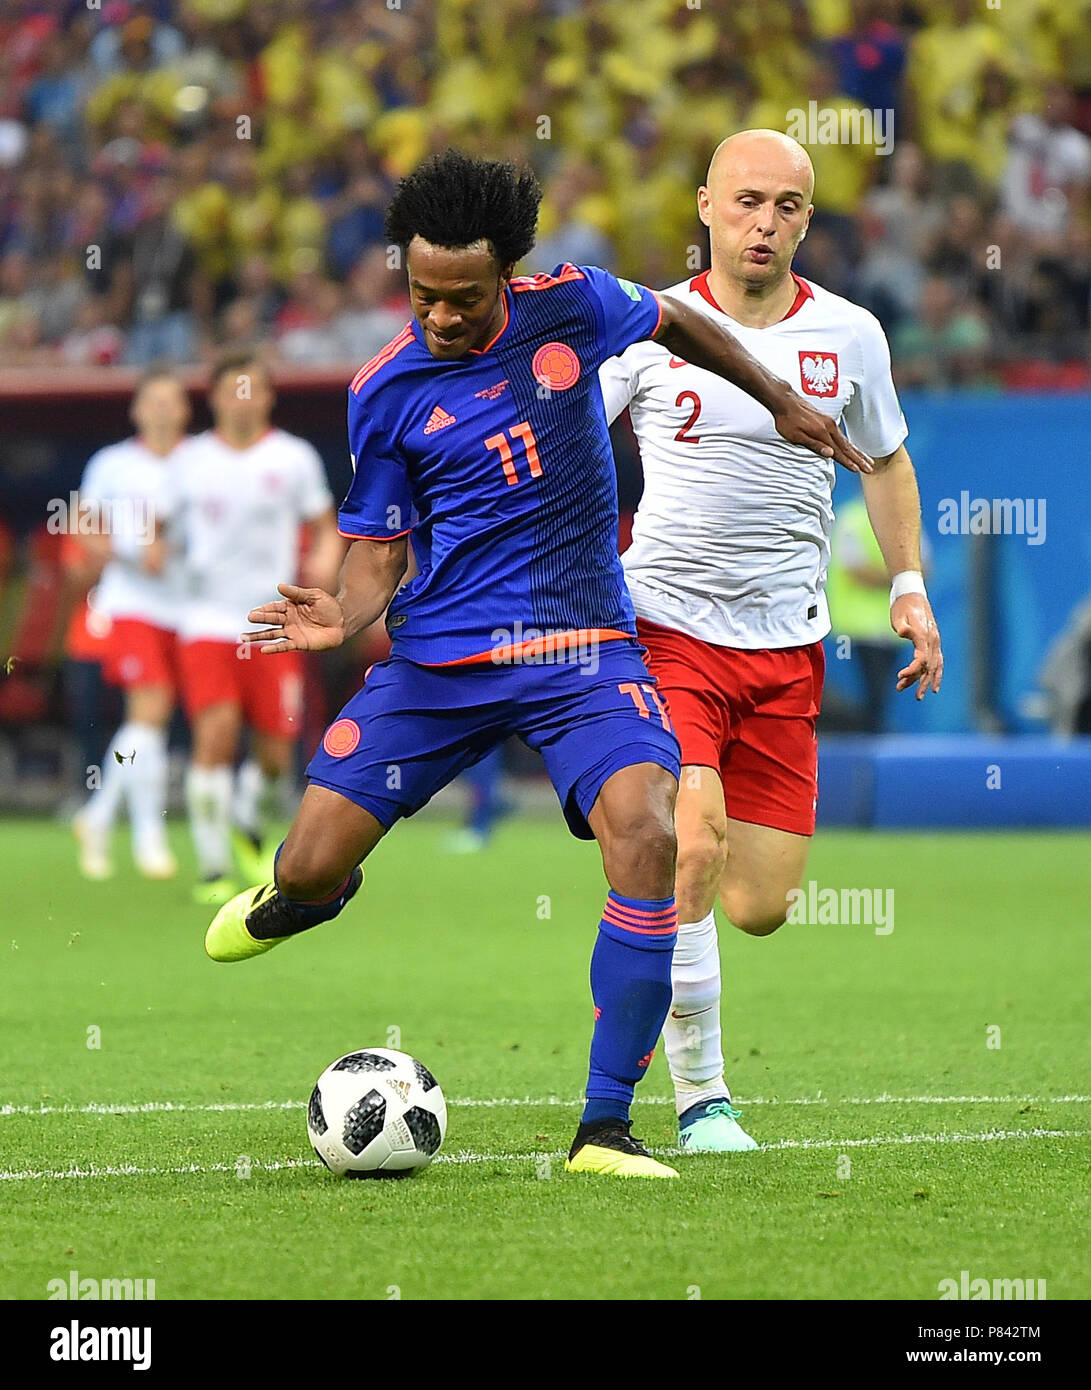 KAZAN, RUSSIA - JUNE 24: Johan Mojica of Colombia scores a goal during the 2018 FIFA World Cup Russia group H match between Poland and Colombia at Kazan Arena on June 24, 2018 in Kazan, Russia. (Photo by Lukasz Laskowski/PressFocus/MB Media) Stock Photo